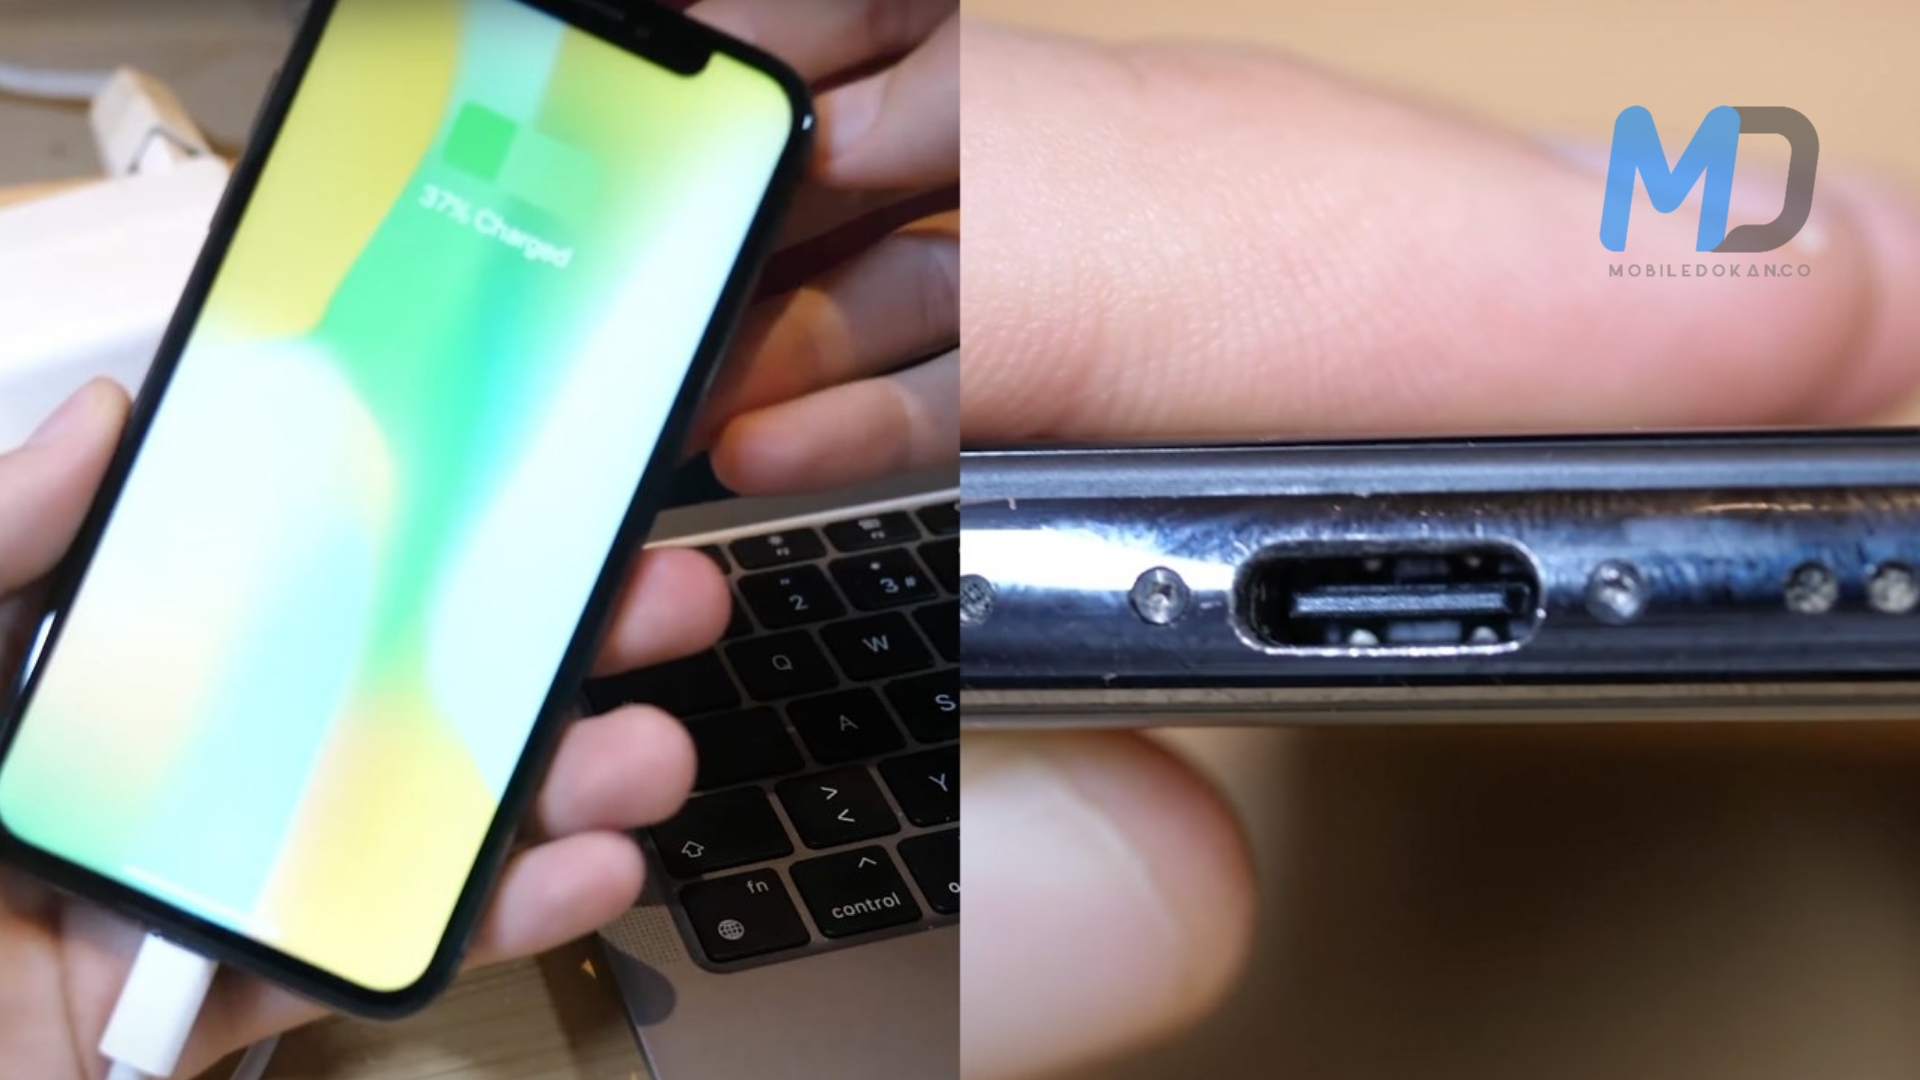 Apple iPhone X modded to replace Lightning port with USB Type-C port